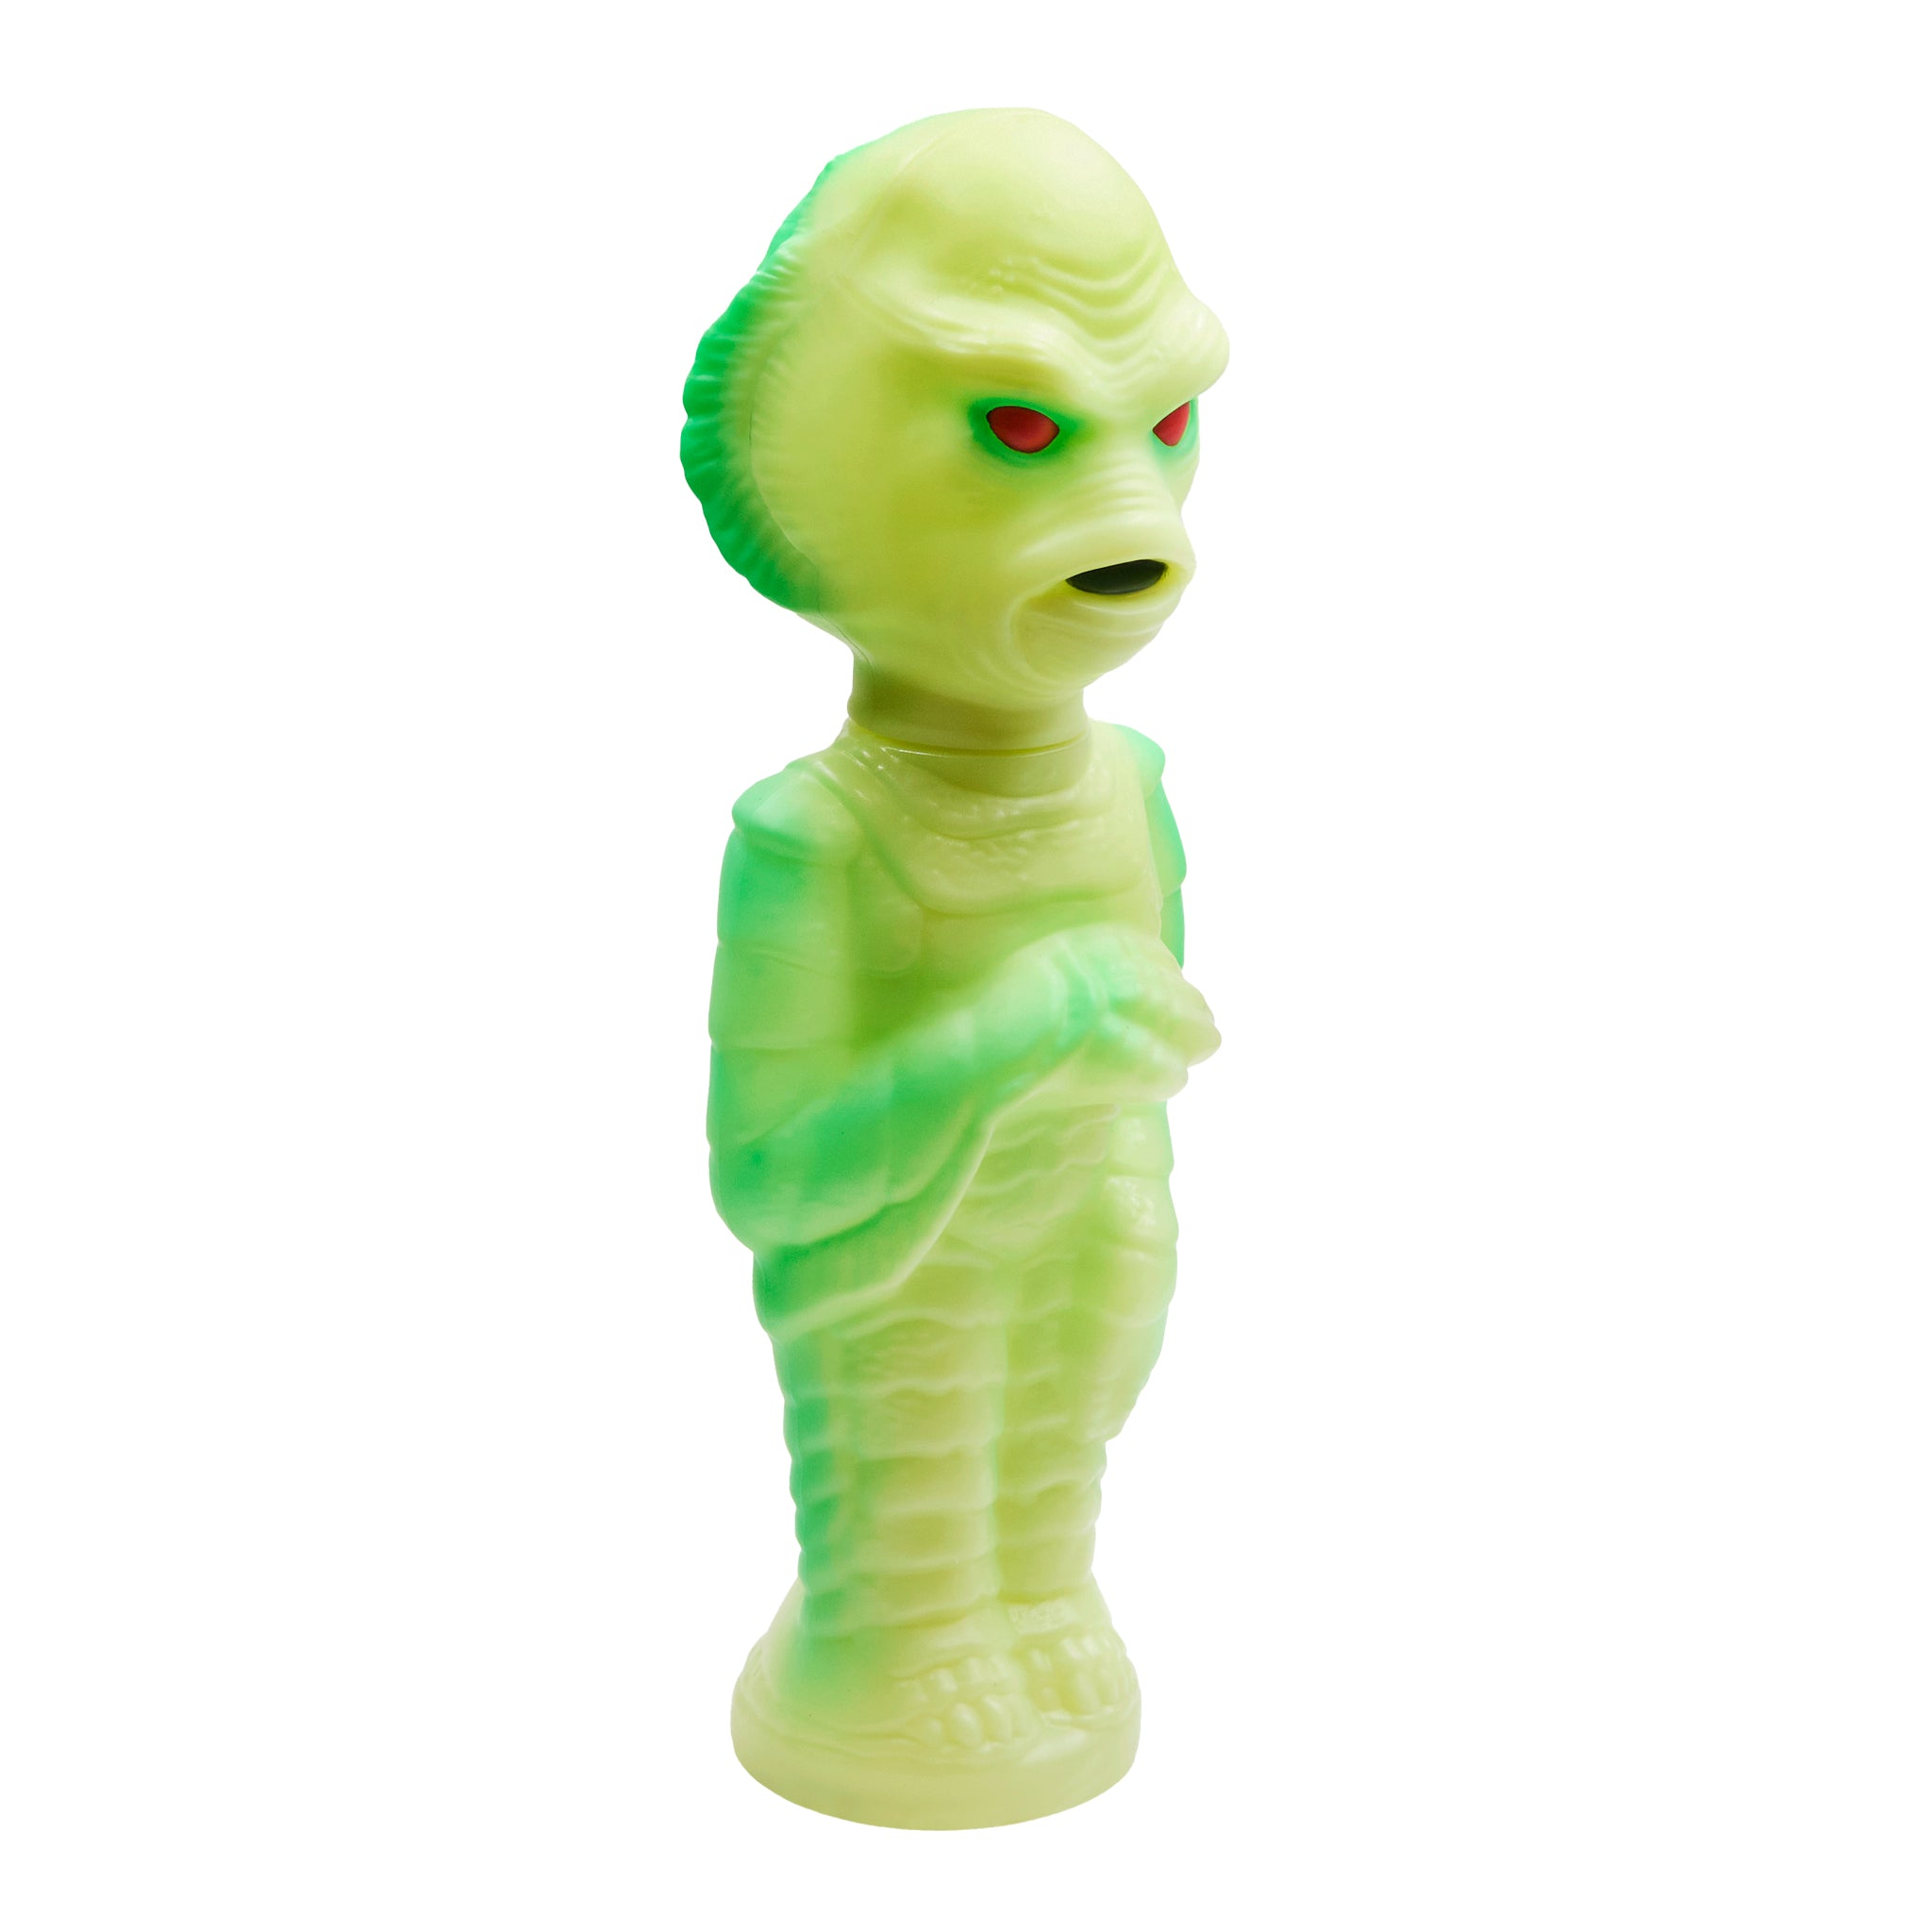 Universal Monsters Super Soapies - Creature from the Black Lagoon (Glow)